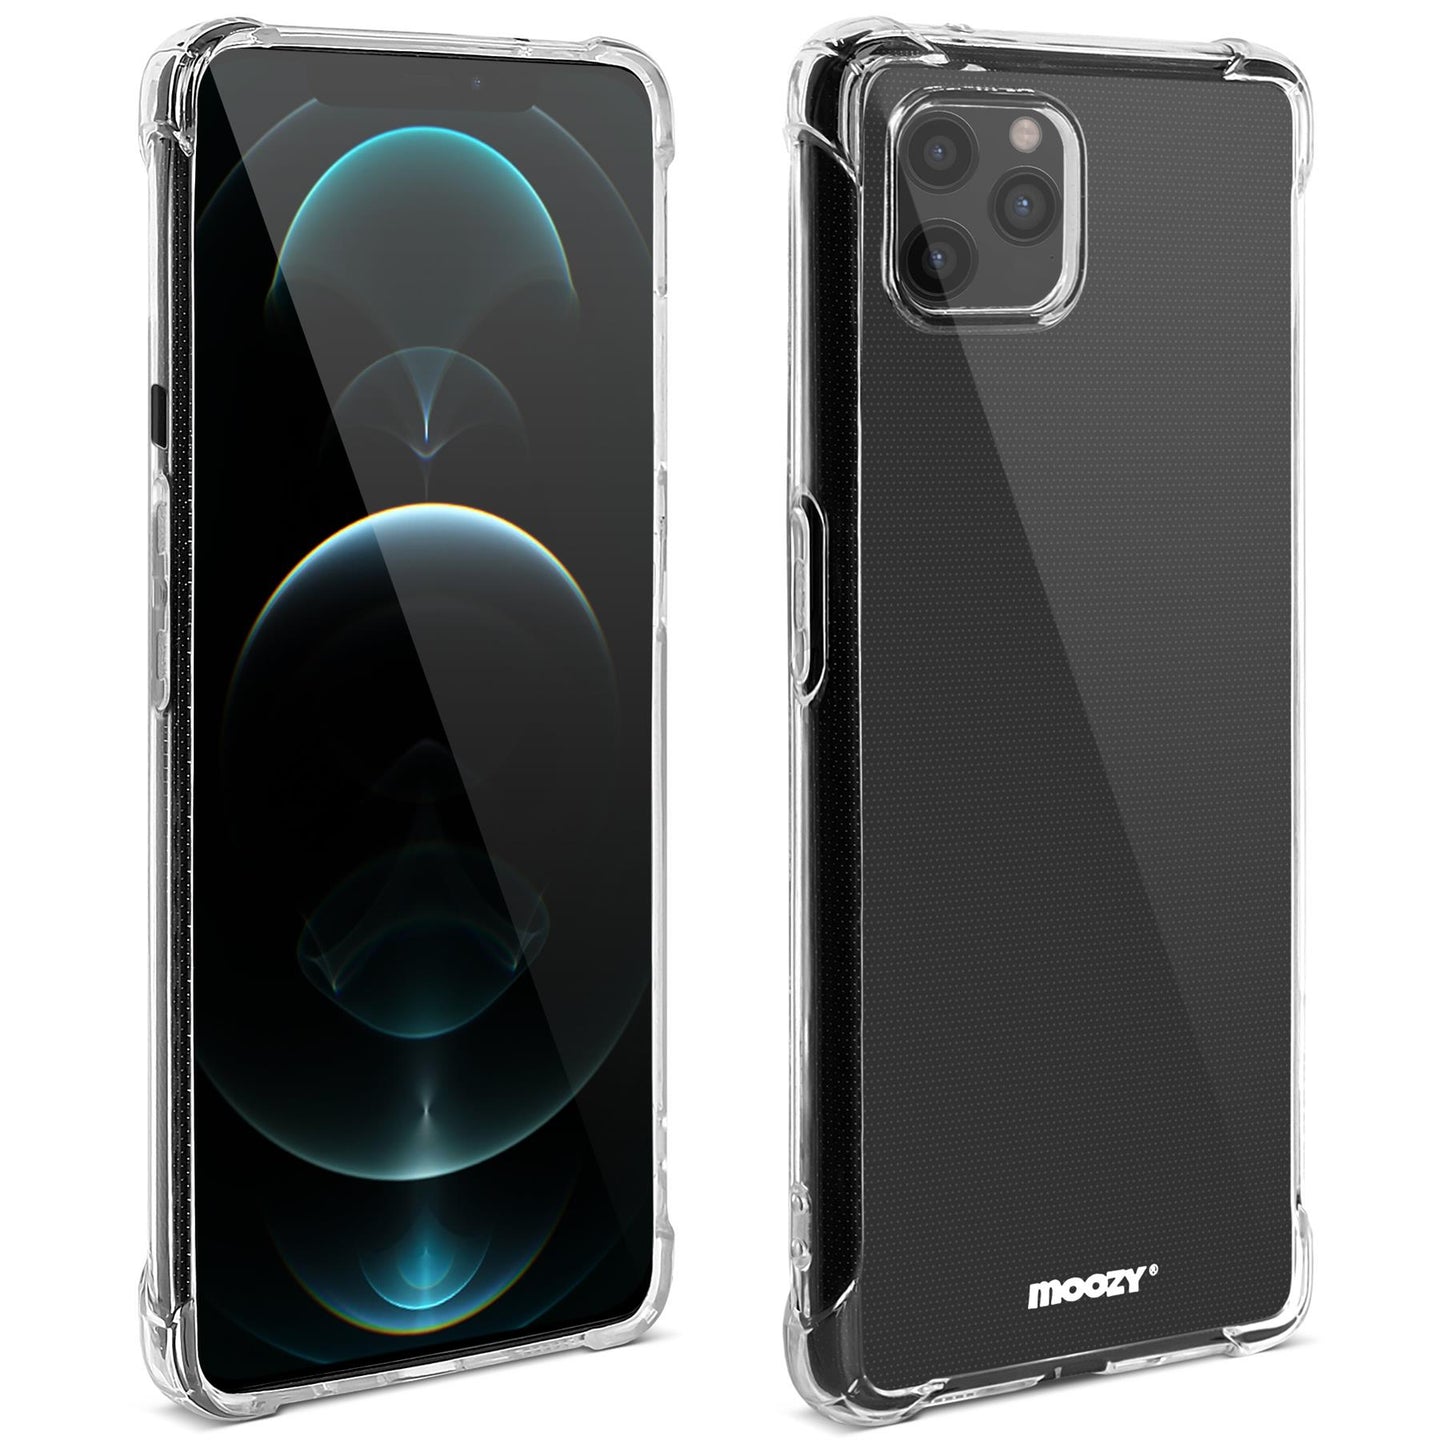 Moozy Shock Proof Silicone Case for iPhone 12 Pro Max - Transparent Crystal Clear Phone Case Soft TPU Cover